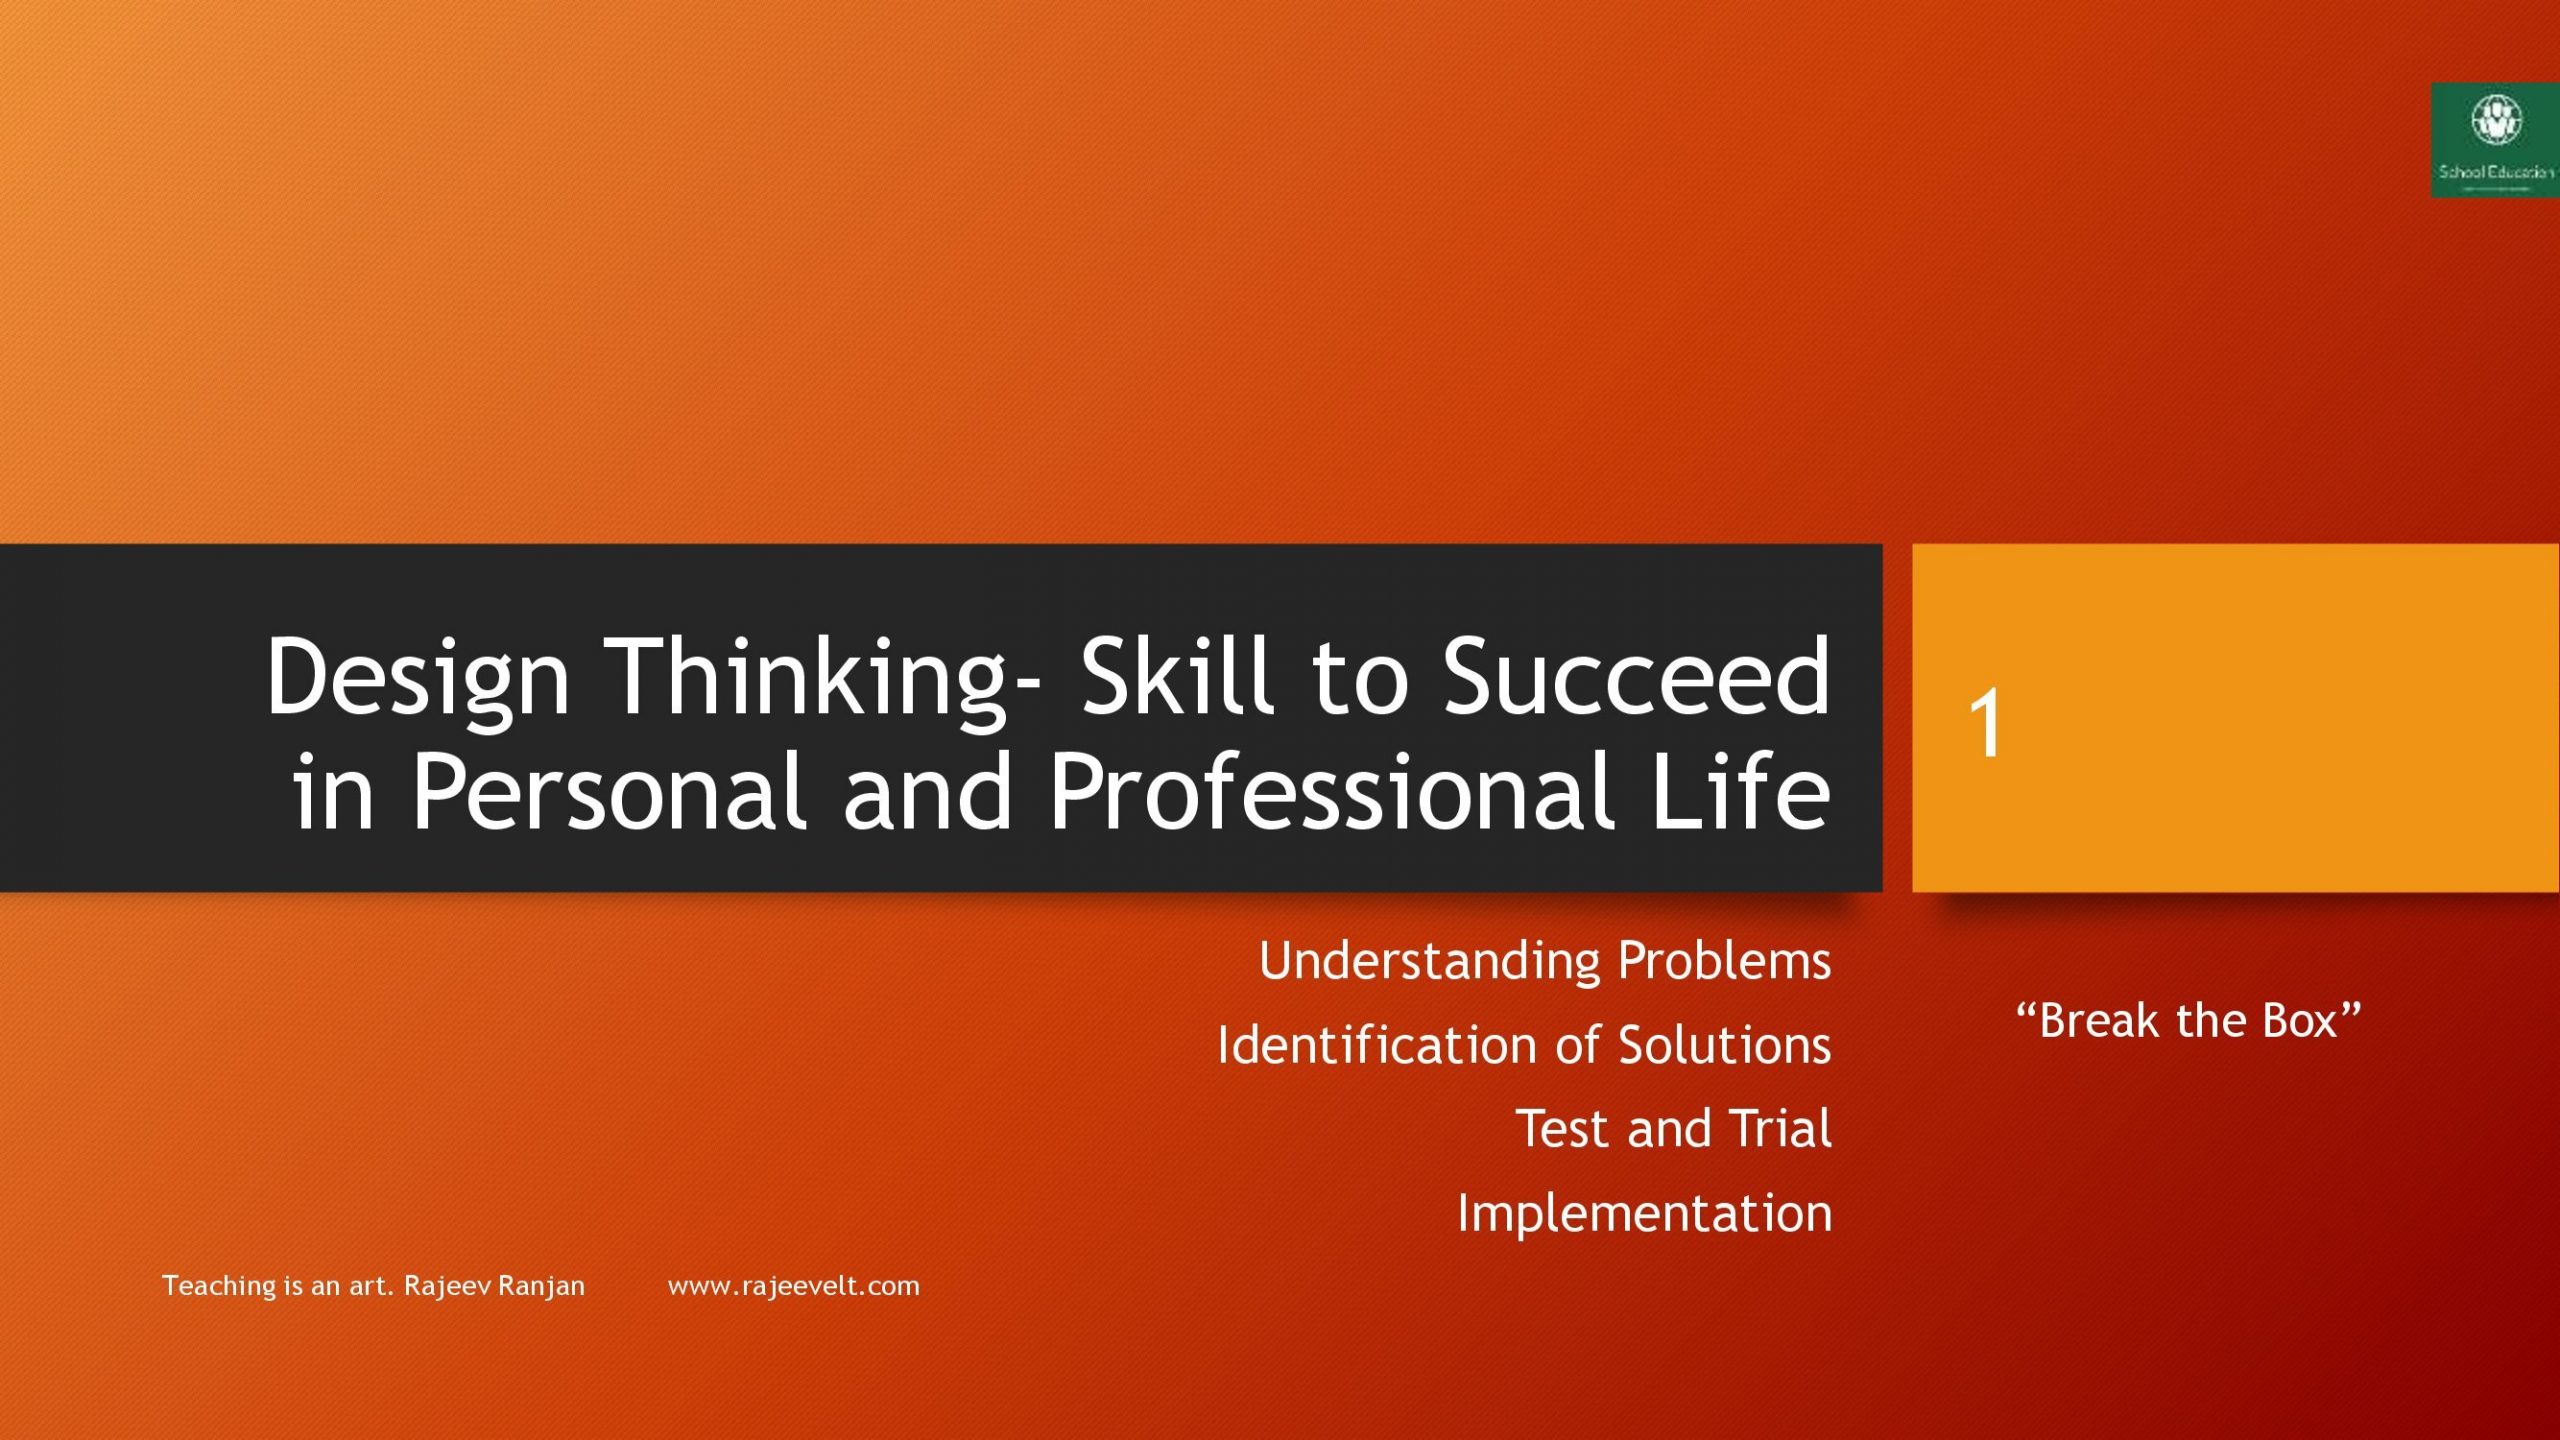 Design Thinking- Skill to Succeed in Personal and Professional Life_rajeevelt